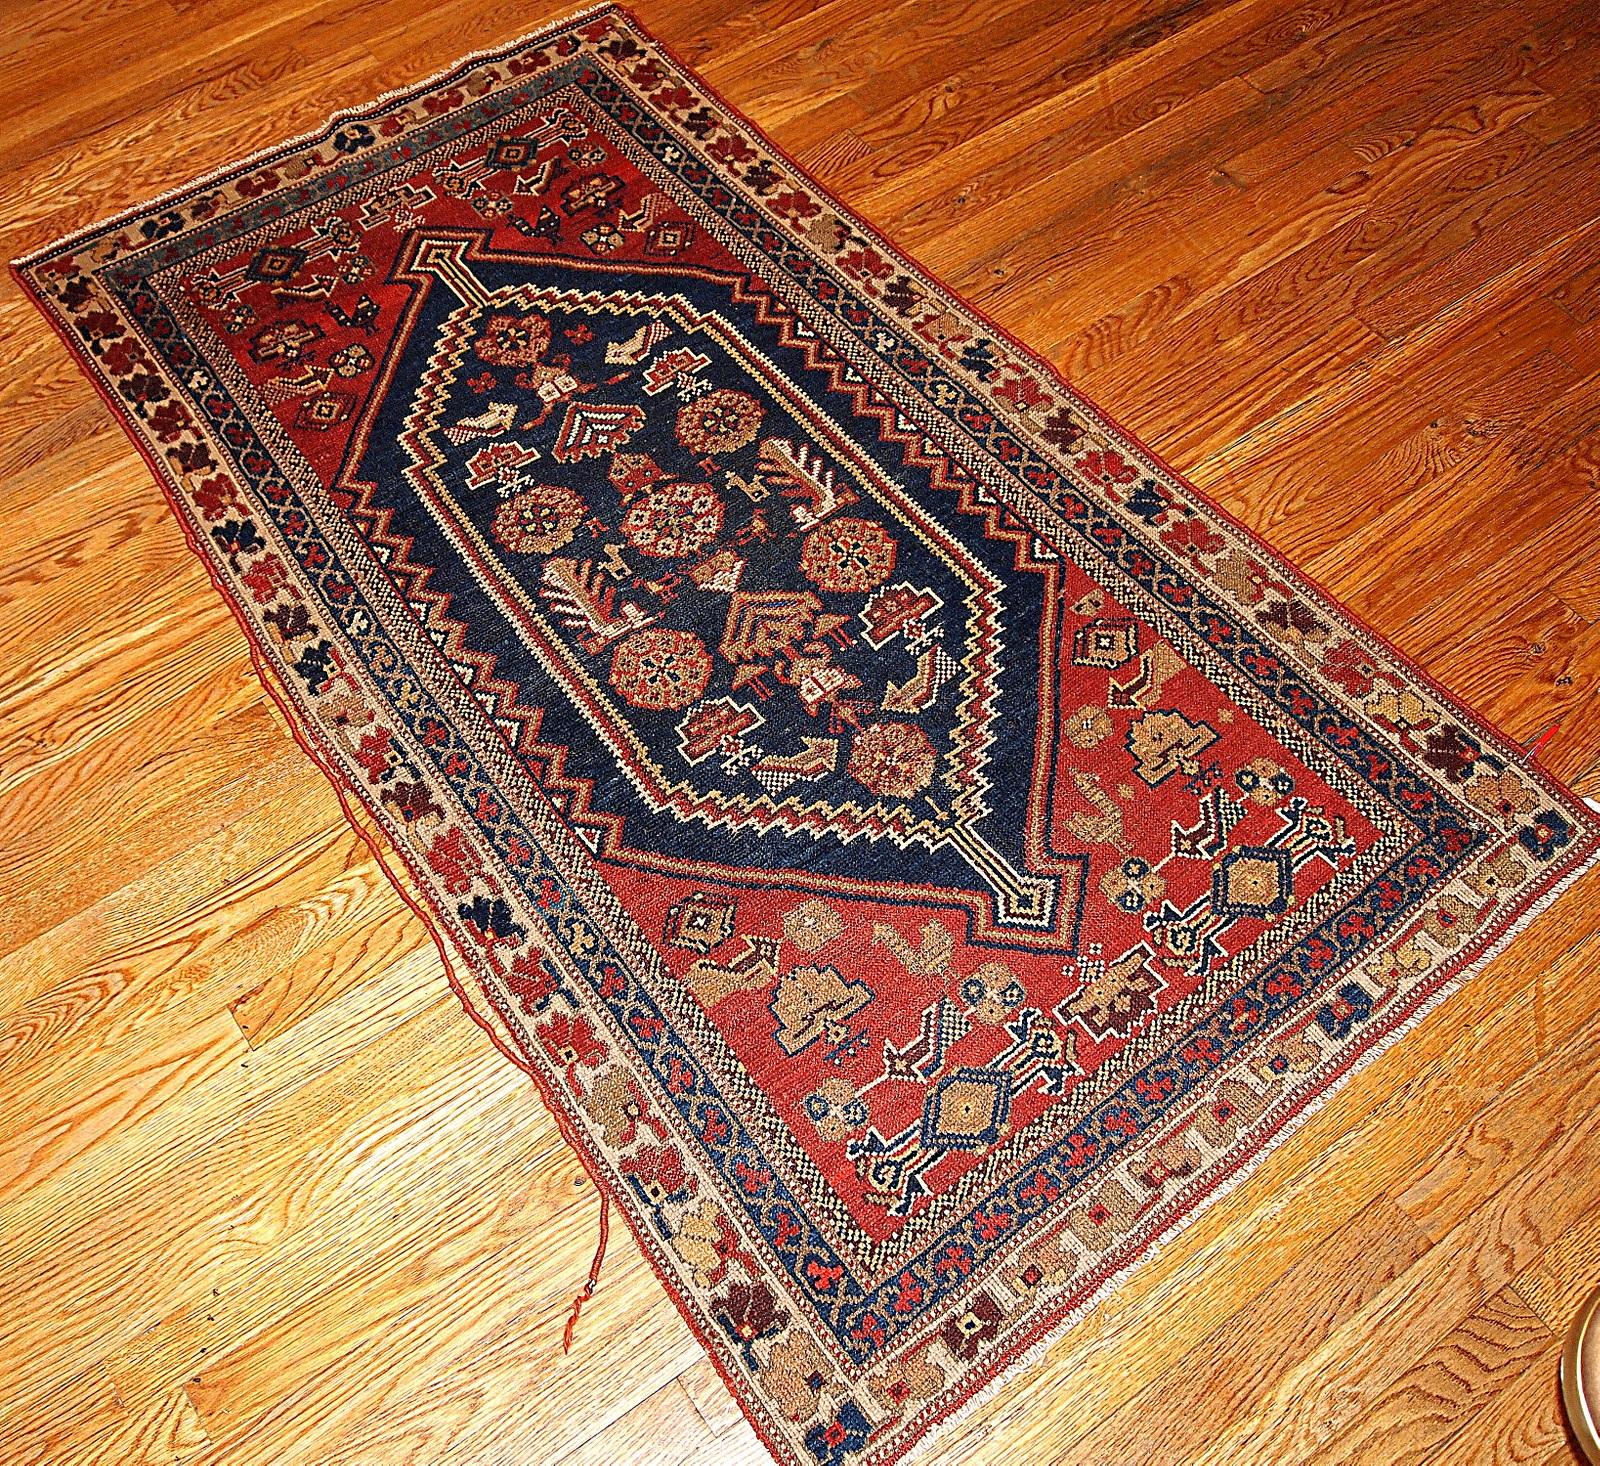 Shiraz rug with a tribal design in navy blue and red shades. This rug is in original good condition.

-Condition: original good,

-Circa: 1920s,

-Size: 3.2' x 5.9' ( 97cm x 180cm ),

-Material: wool,

-Style: Shiraz,

-Background